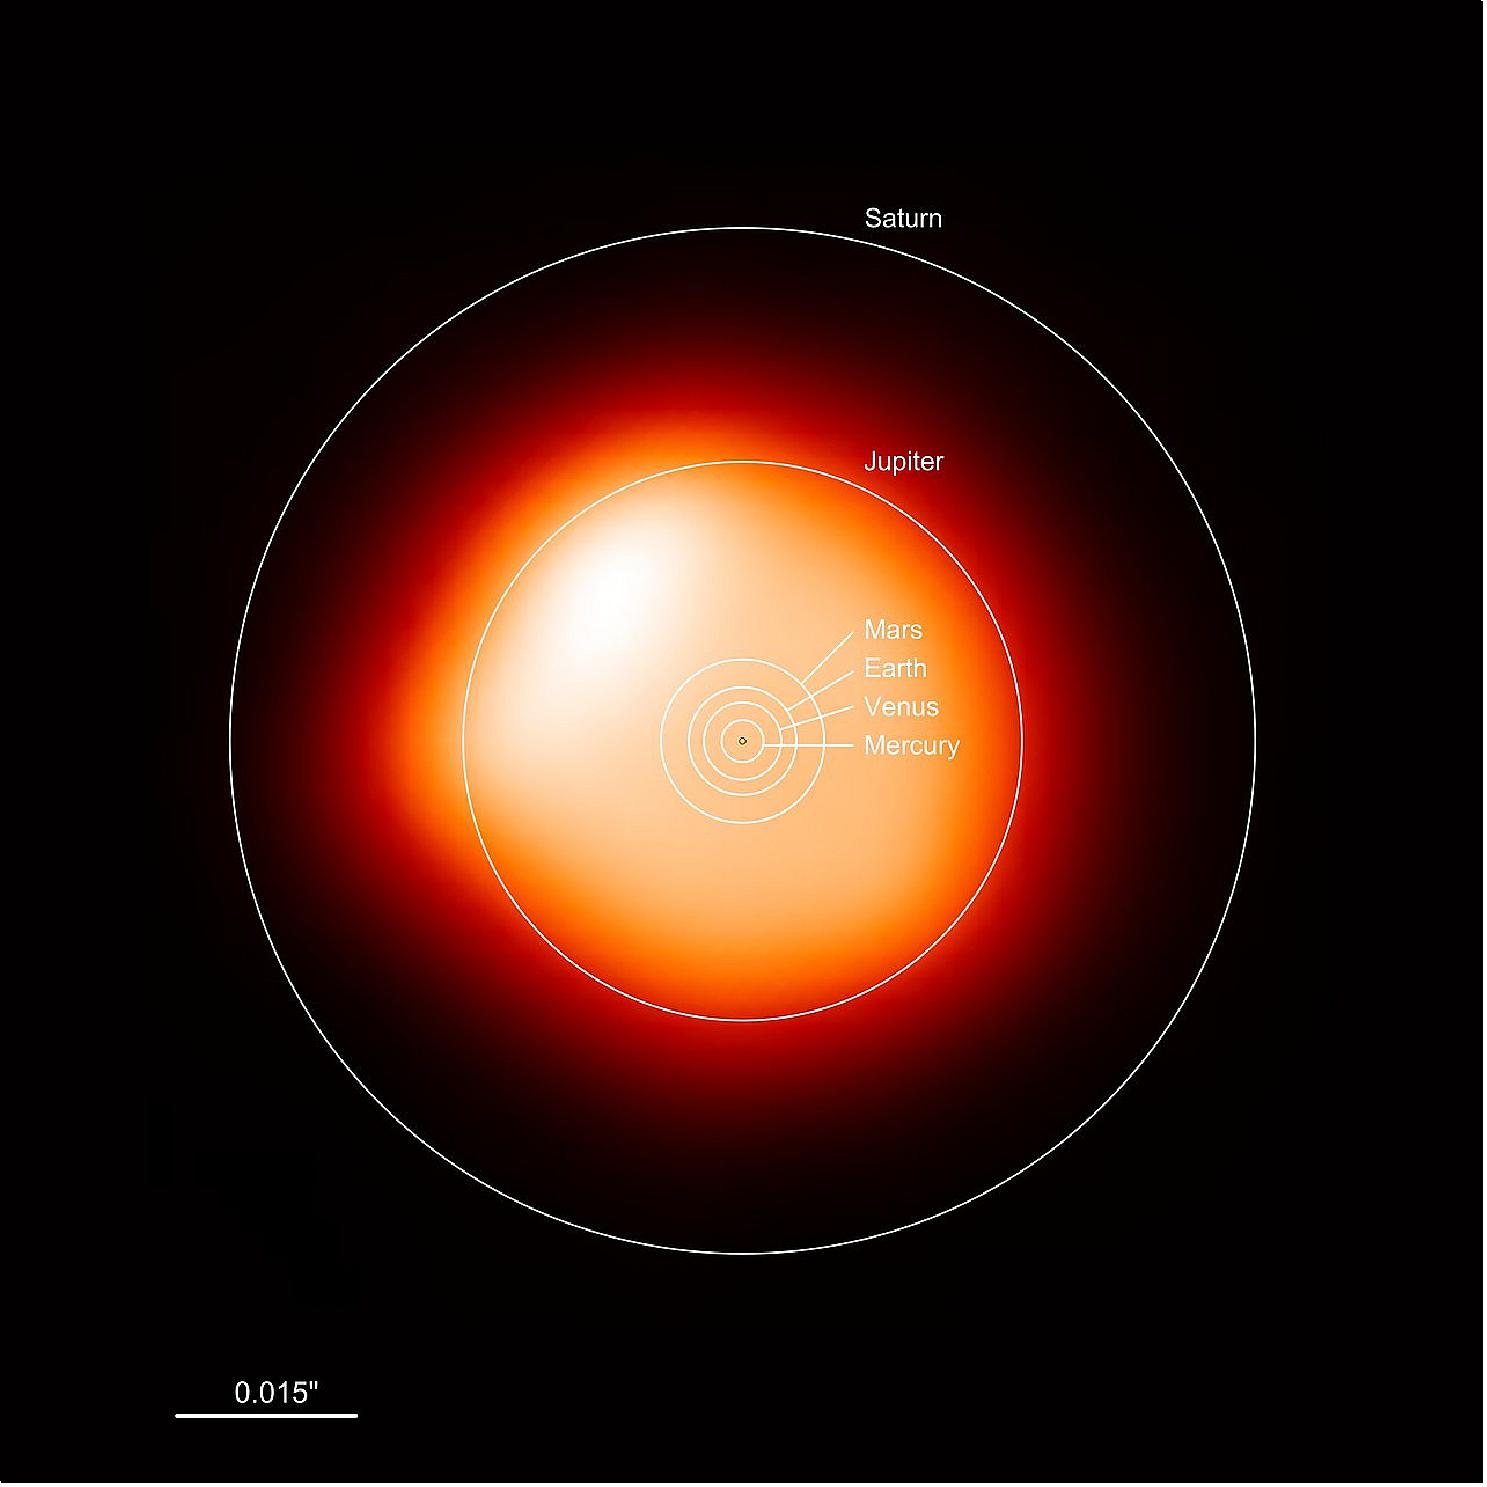 Figure 32: This image, made with ALMA, shows the red supergiant Betelgeuse — one of the largest stars known. In the millimeter continuum the star is around 1400 times larger than our Sun. The overlaid annotation shows how large the star is compared to the Solar System. Betelgeuse would engulf all four terrestrial planets — Mercury, Venus, Earth and Mars — and even the gas giant Jupiter. Only Saturn would be beyond its surface (image credit: ALMA (ESO/NAOJ/NRAO)/E. O'Gorman/P. Kervella) 38)